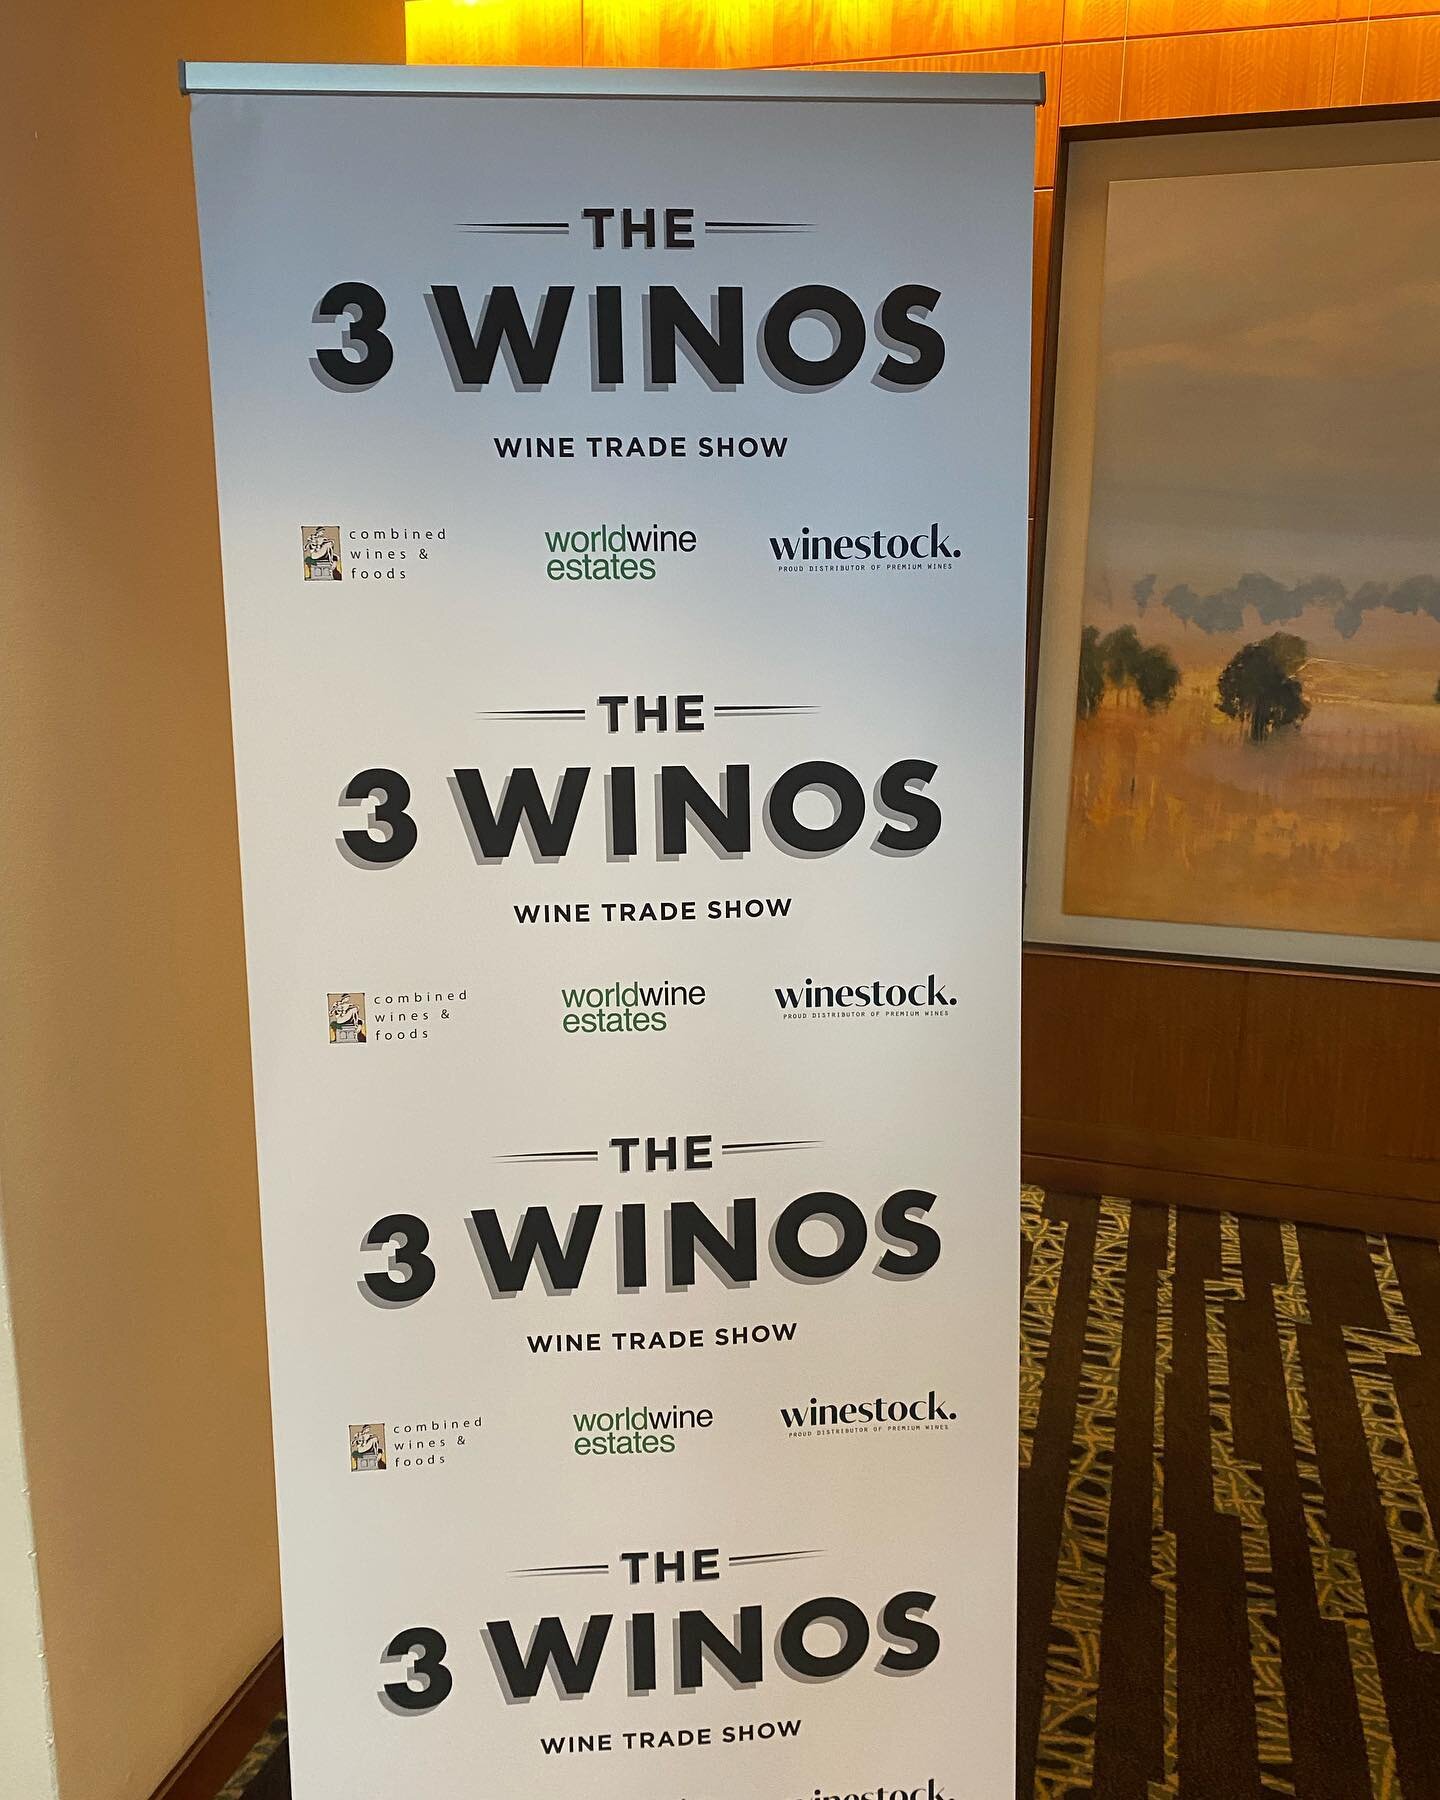 3 Winos trade show has kicked off on a magnificent day in Sydney at the Four Seasons Hotel.